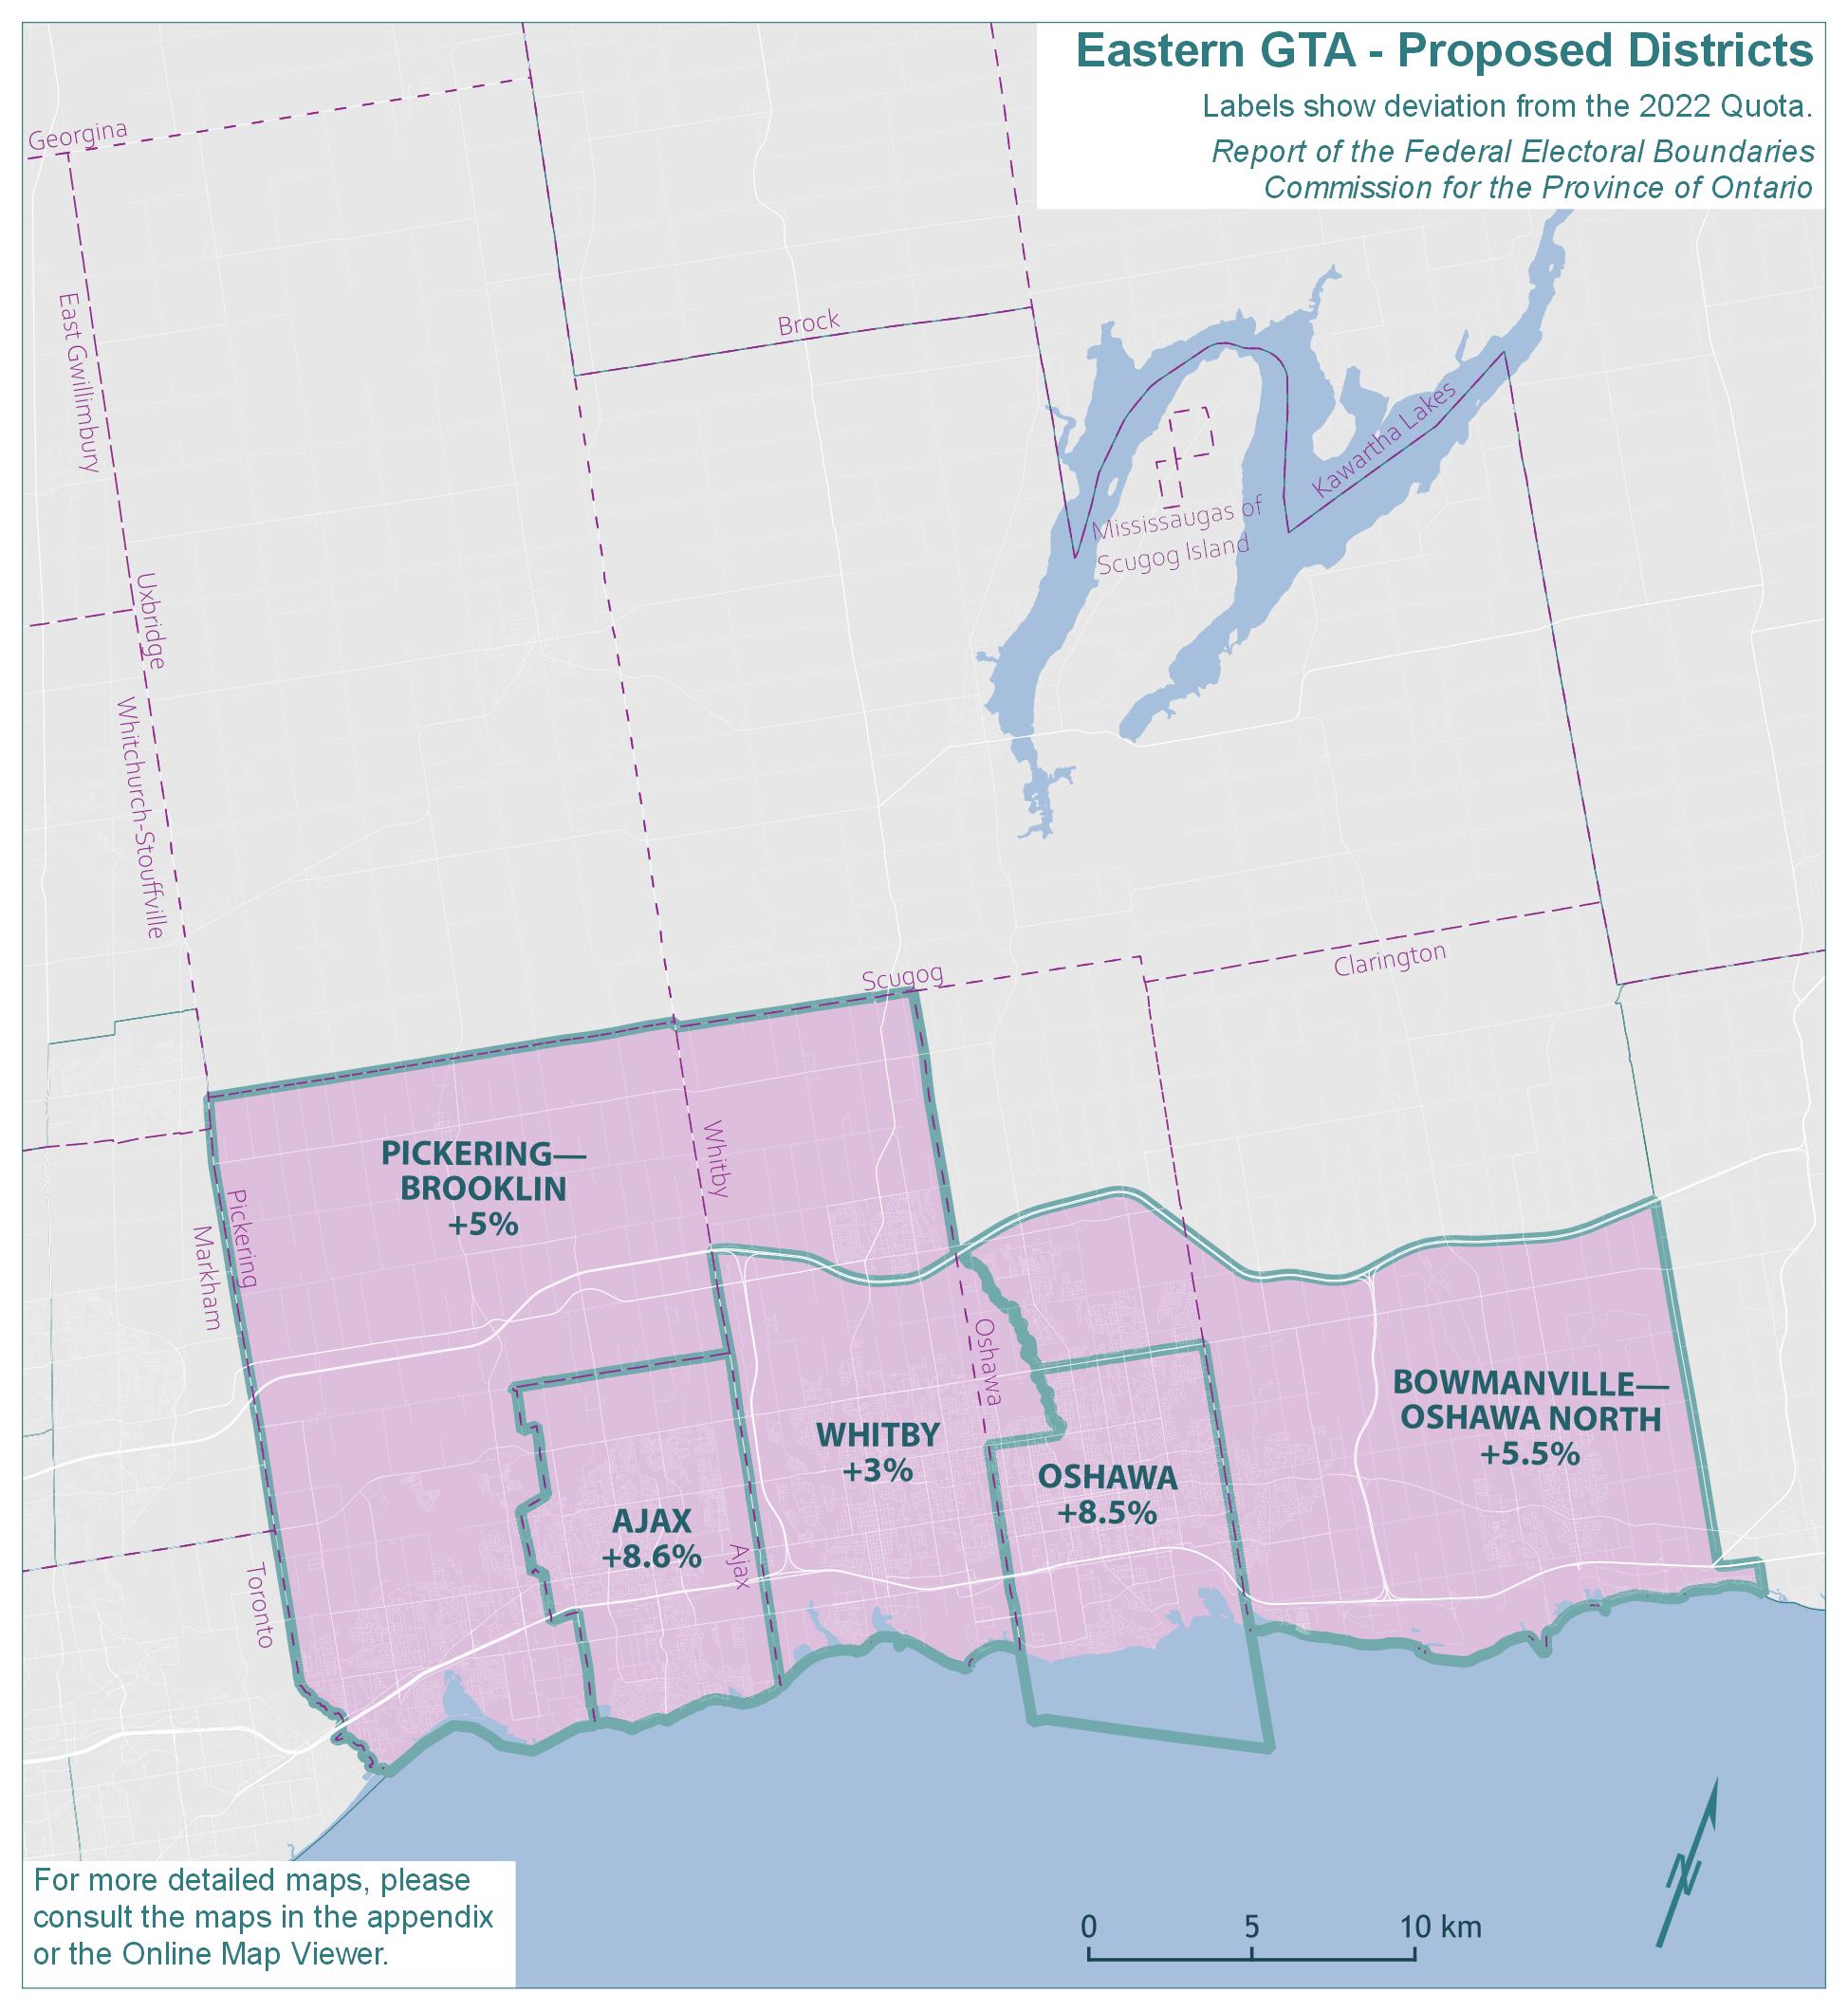 Eastern Greater Toronto Area (GTA) - Proposed Districts